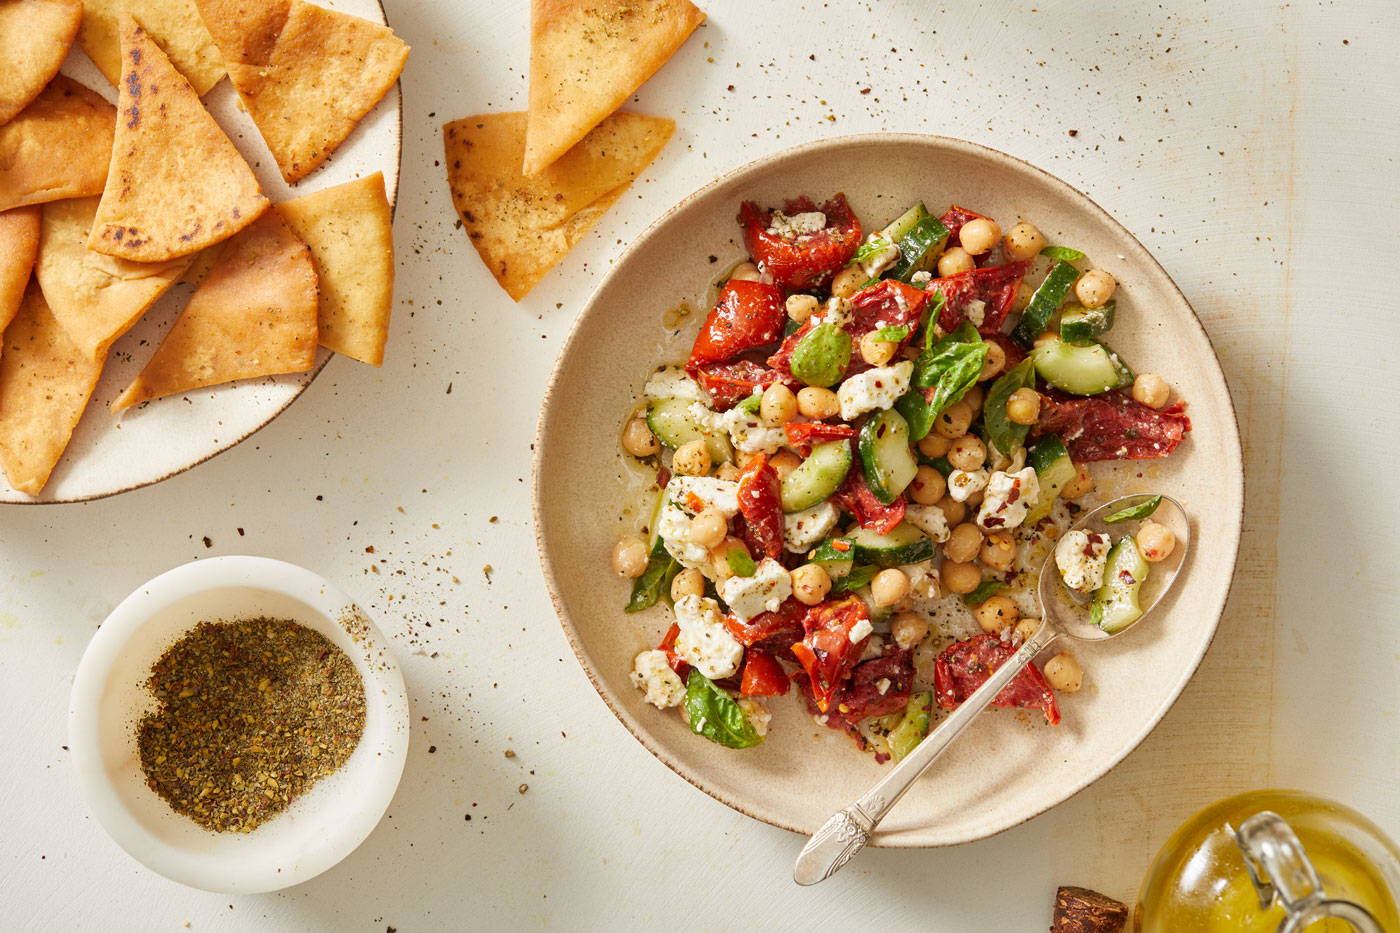 Chickpea salad with feta and roasted tomatoes